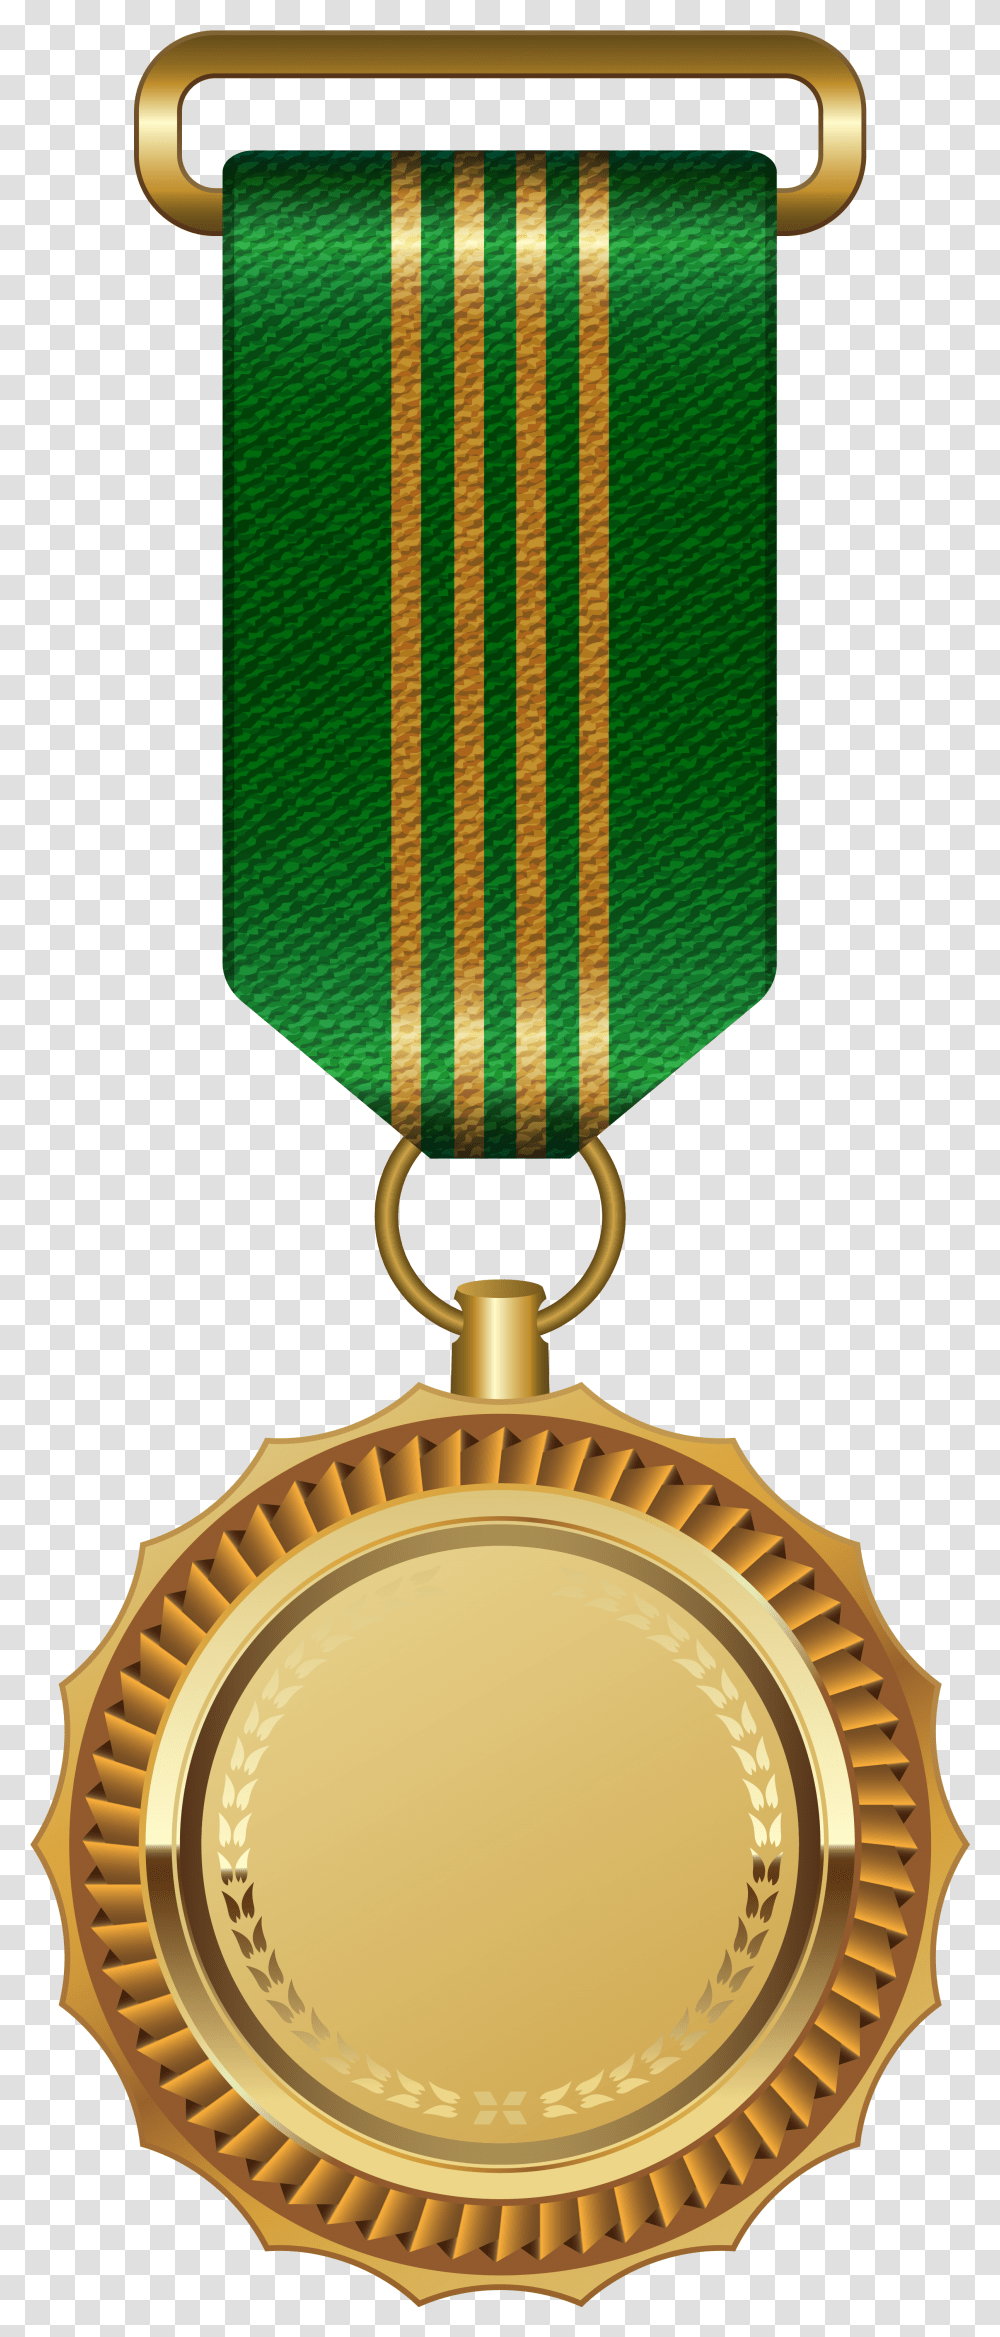 Green Ribbon Clipart Image Gold Medal With Green Ribbon, Lamp, Trophy Transparent Png